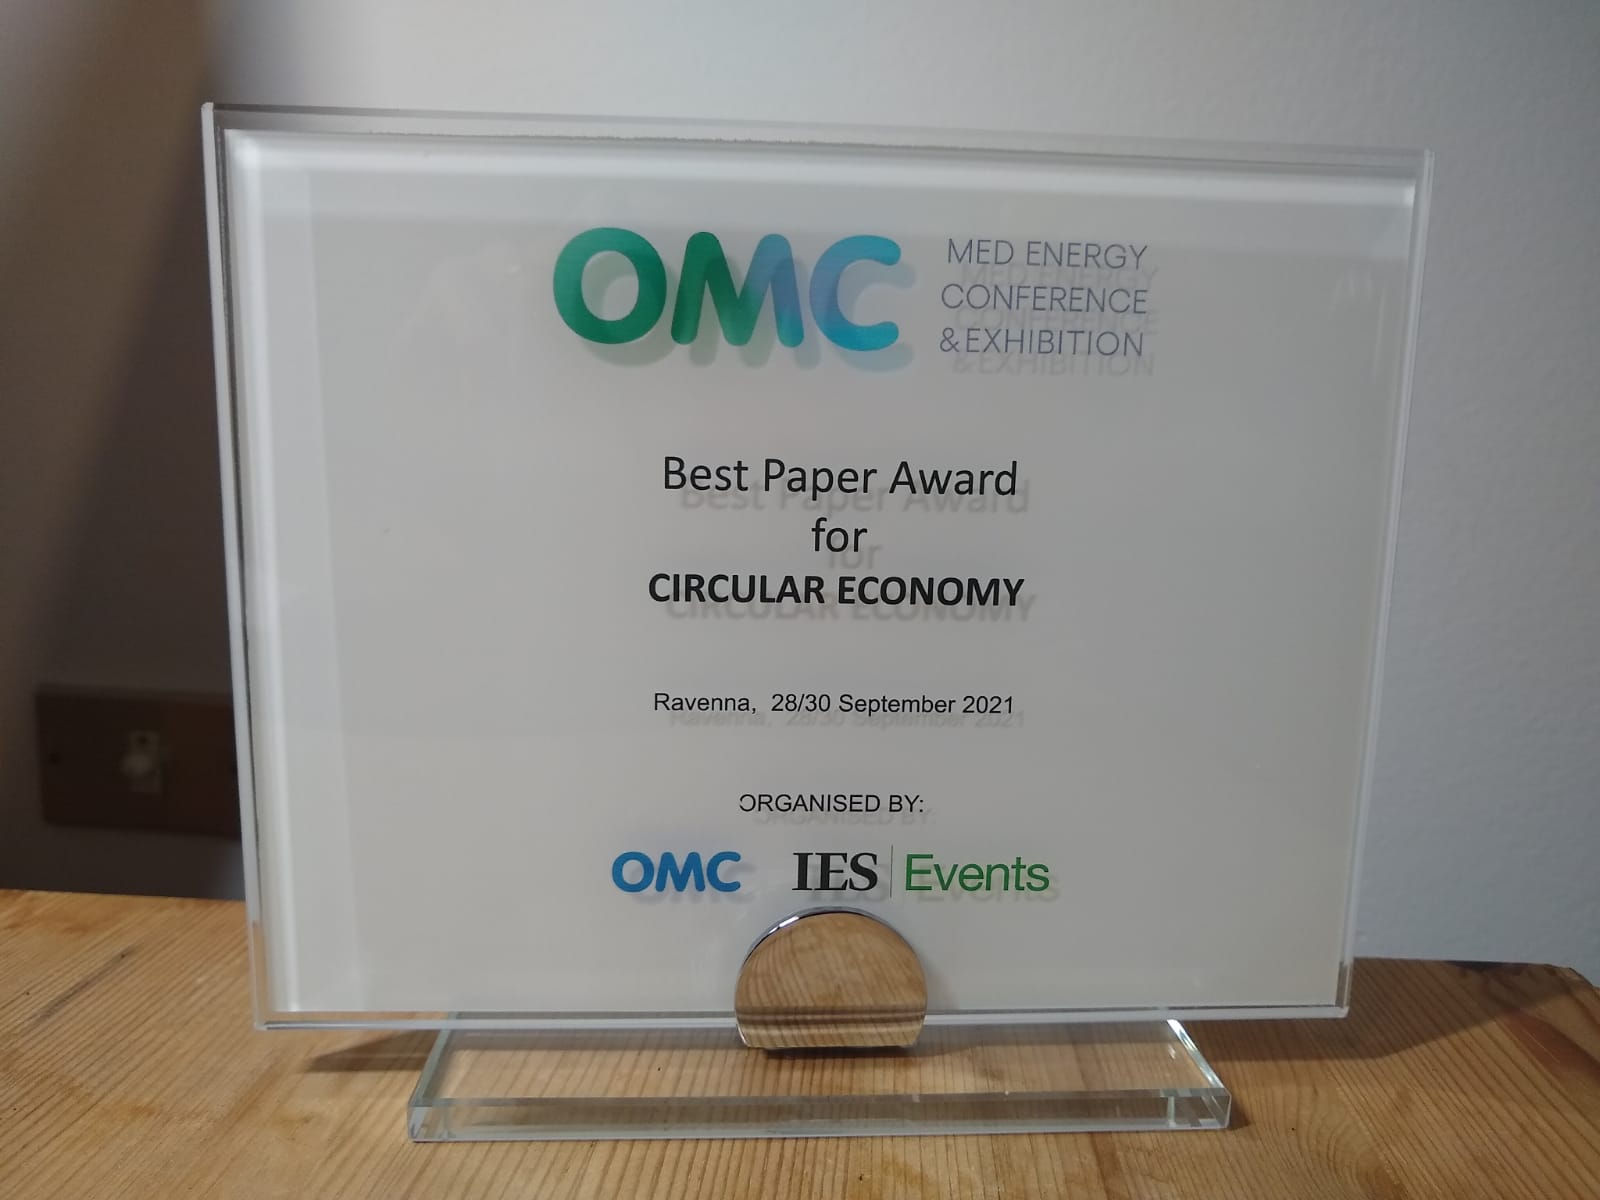 OMC Best Paper Award for Circular Economy goes to Adrireef Project